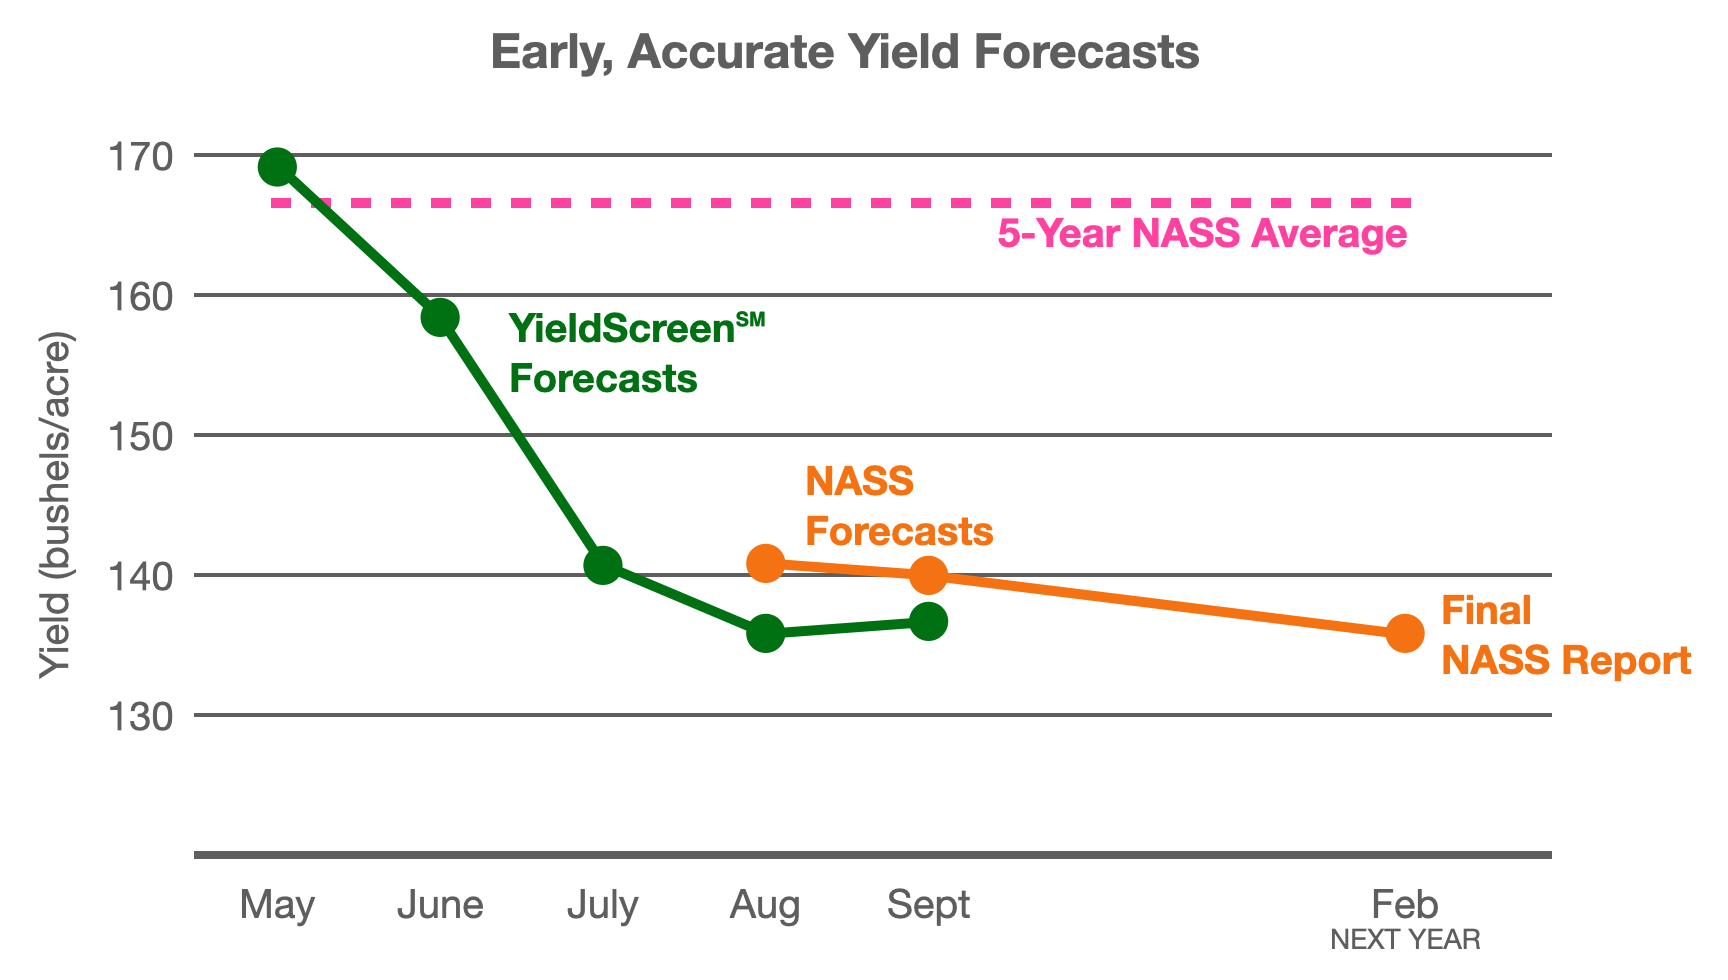 graph showing YieldScreen crop forecast compared to NASS forecast and 5-year average